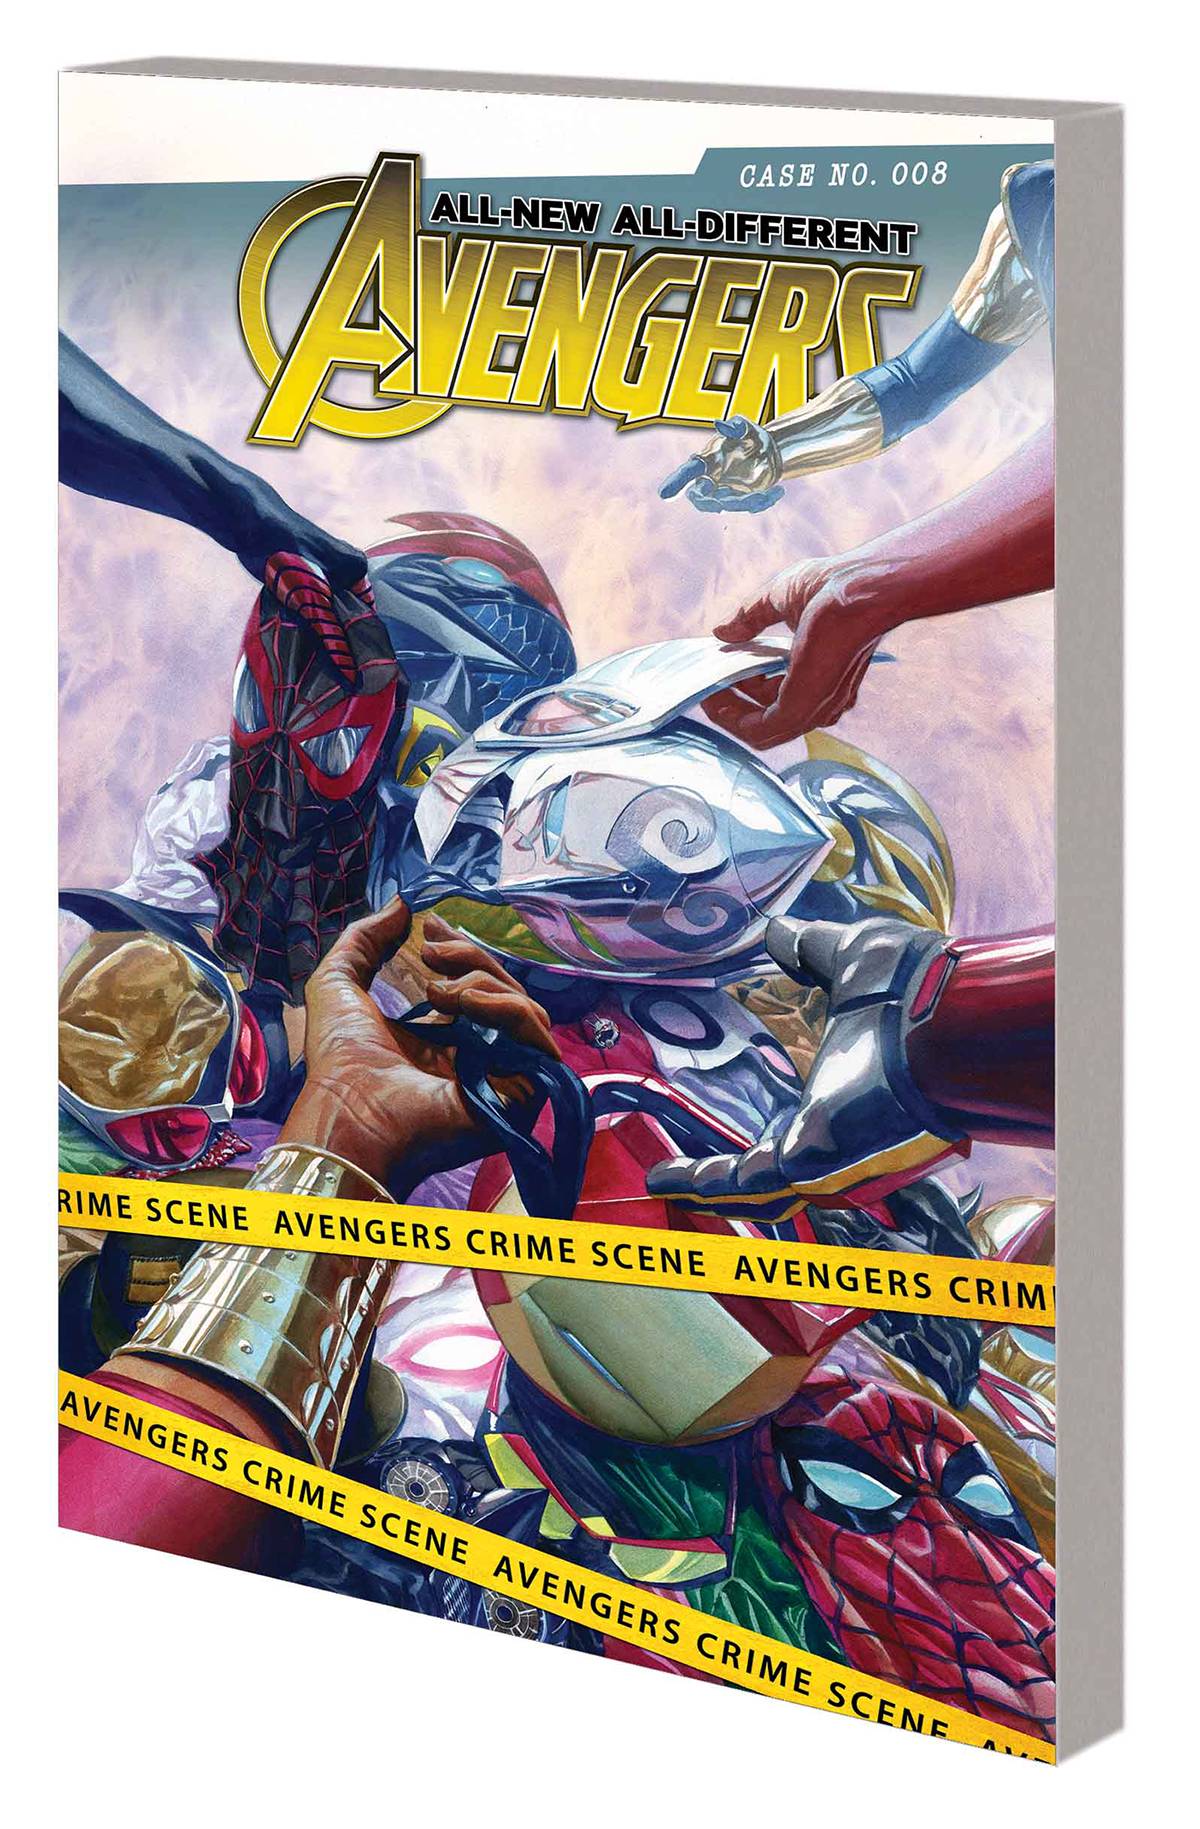 ALL-NEW, ALL-DIFFERENT AVENGERS VOL 02: FAMILY BUSINESS